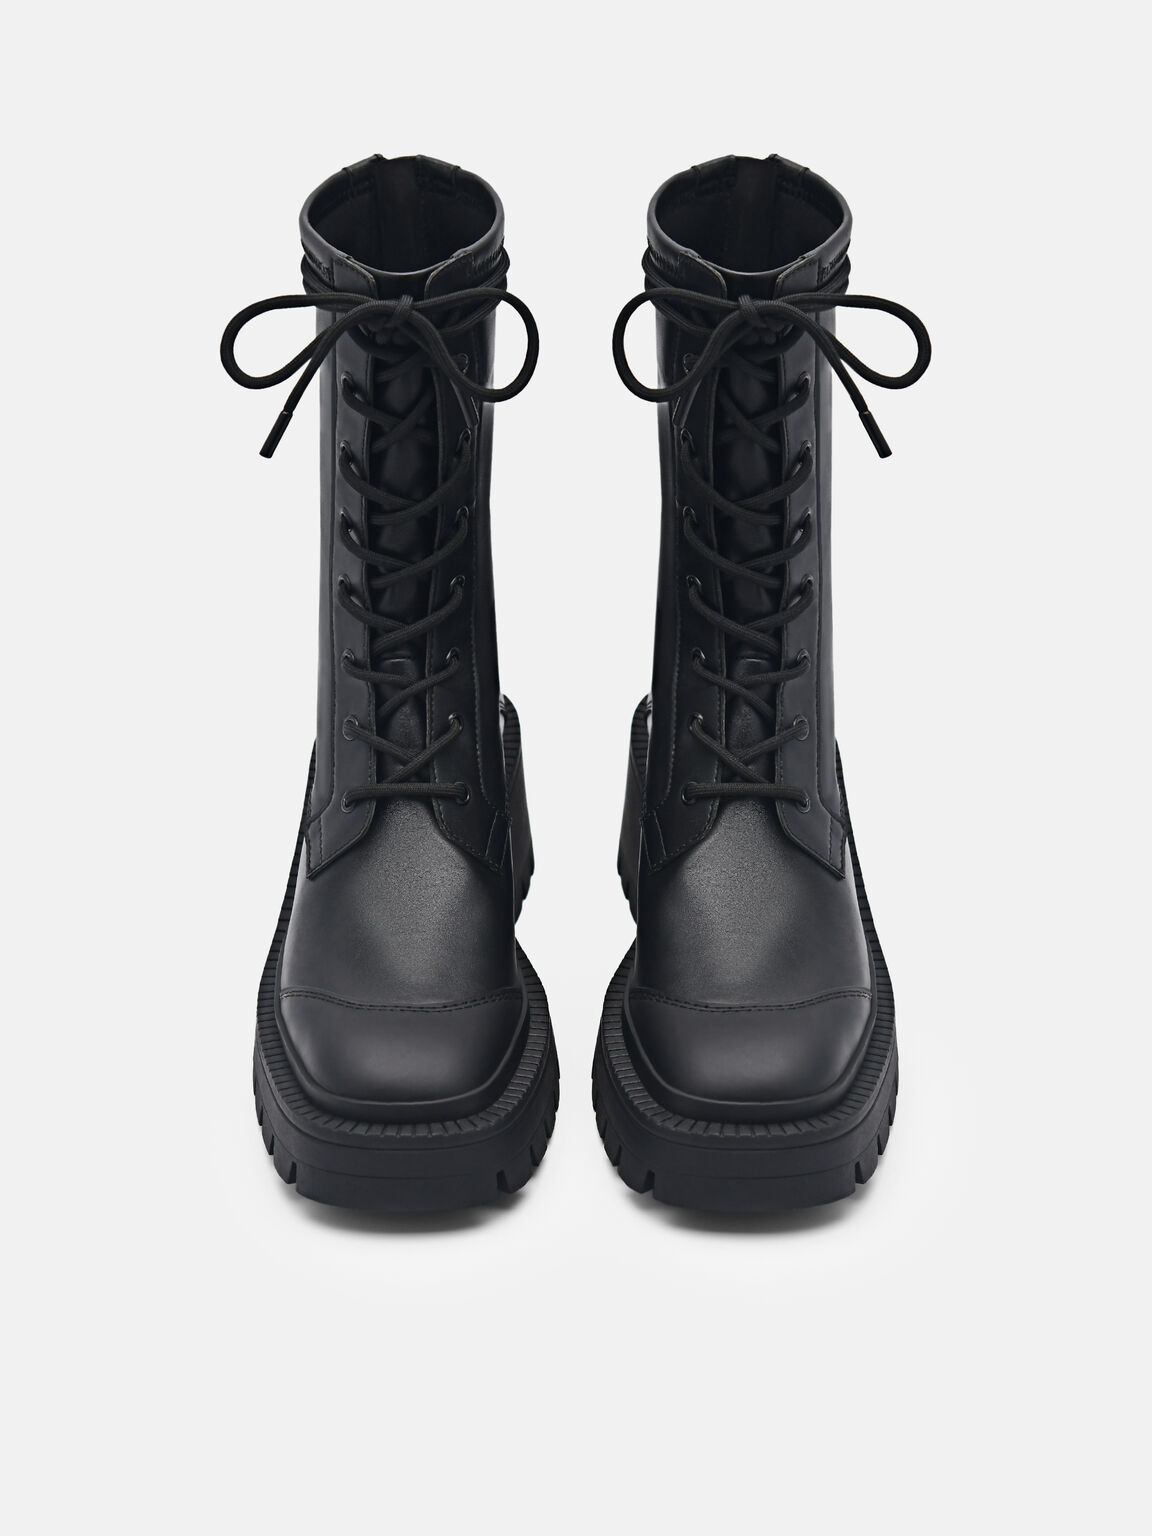 Poppy Ankle Boots, Black